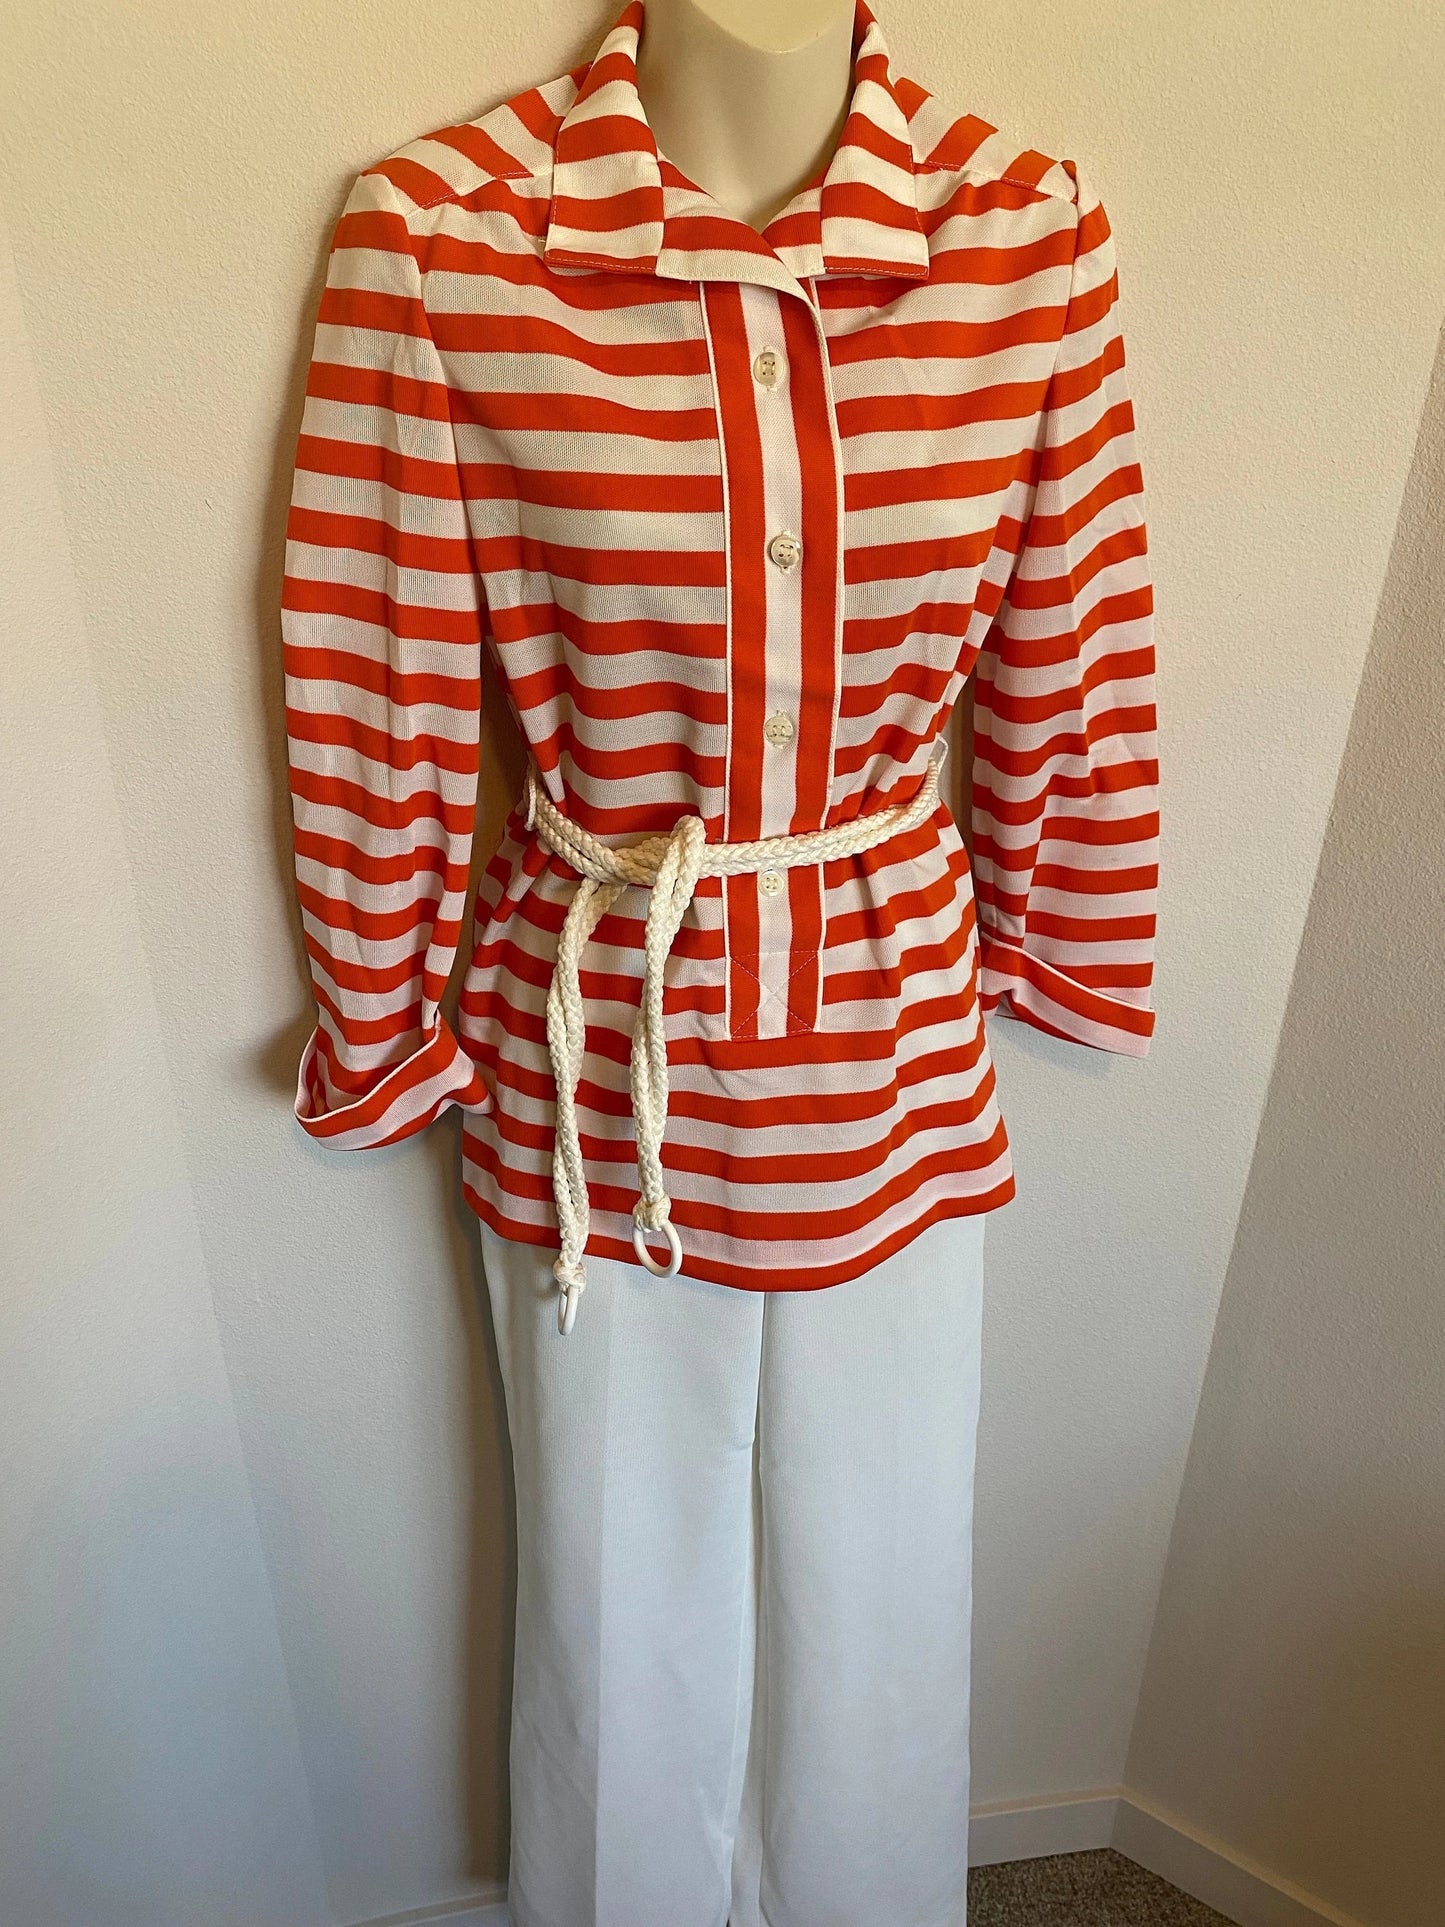 Vintage Women's Clothing Blouse, Belt, and Trousers